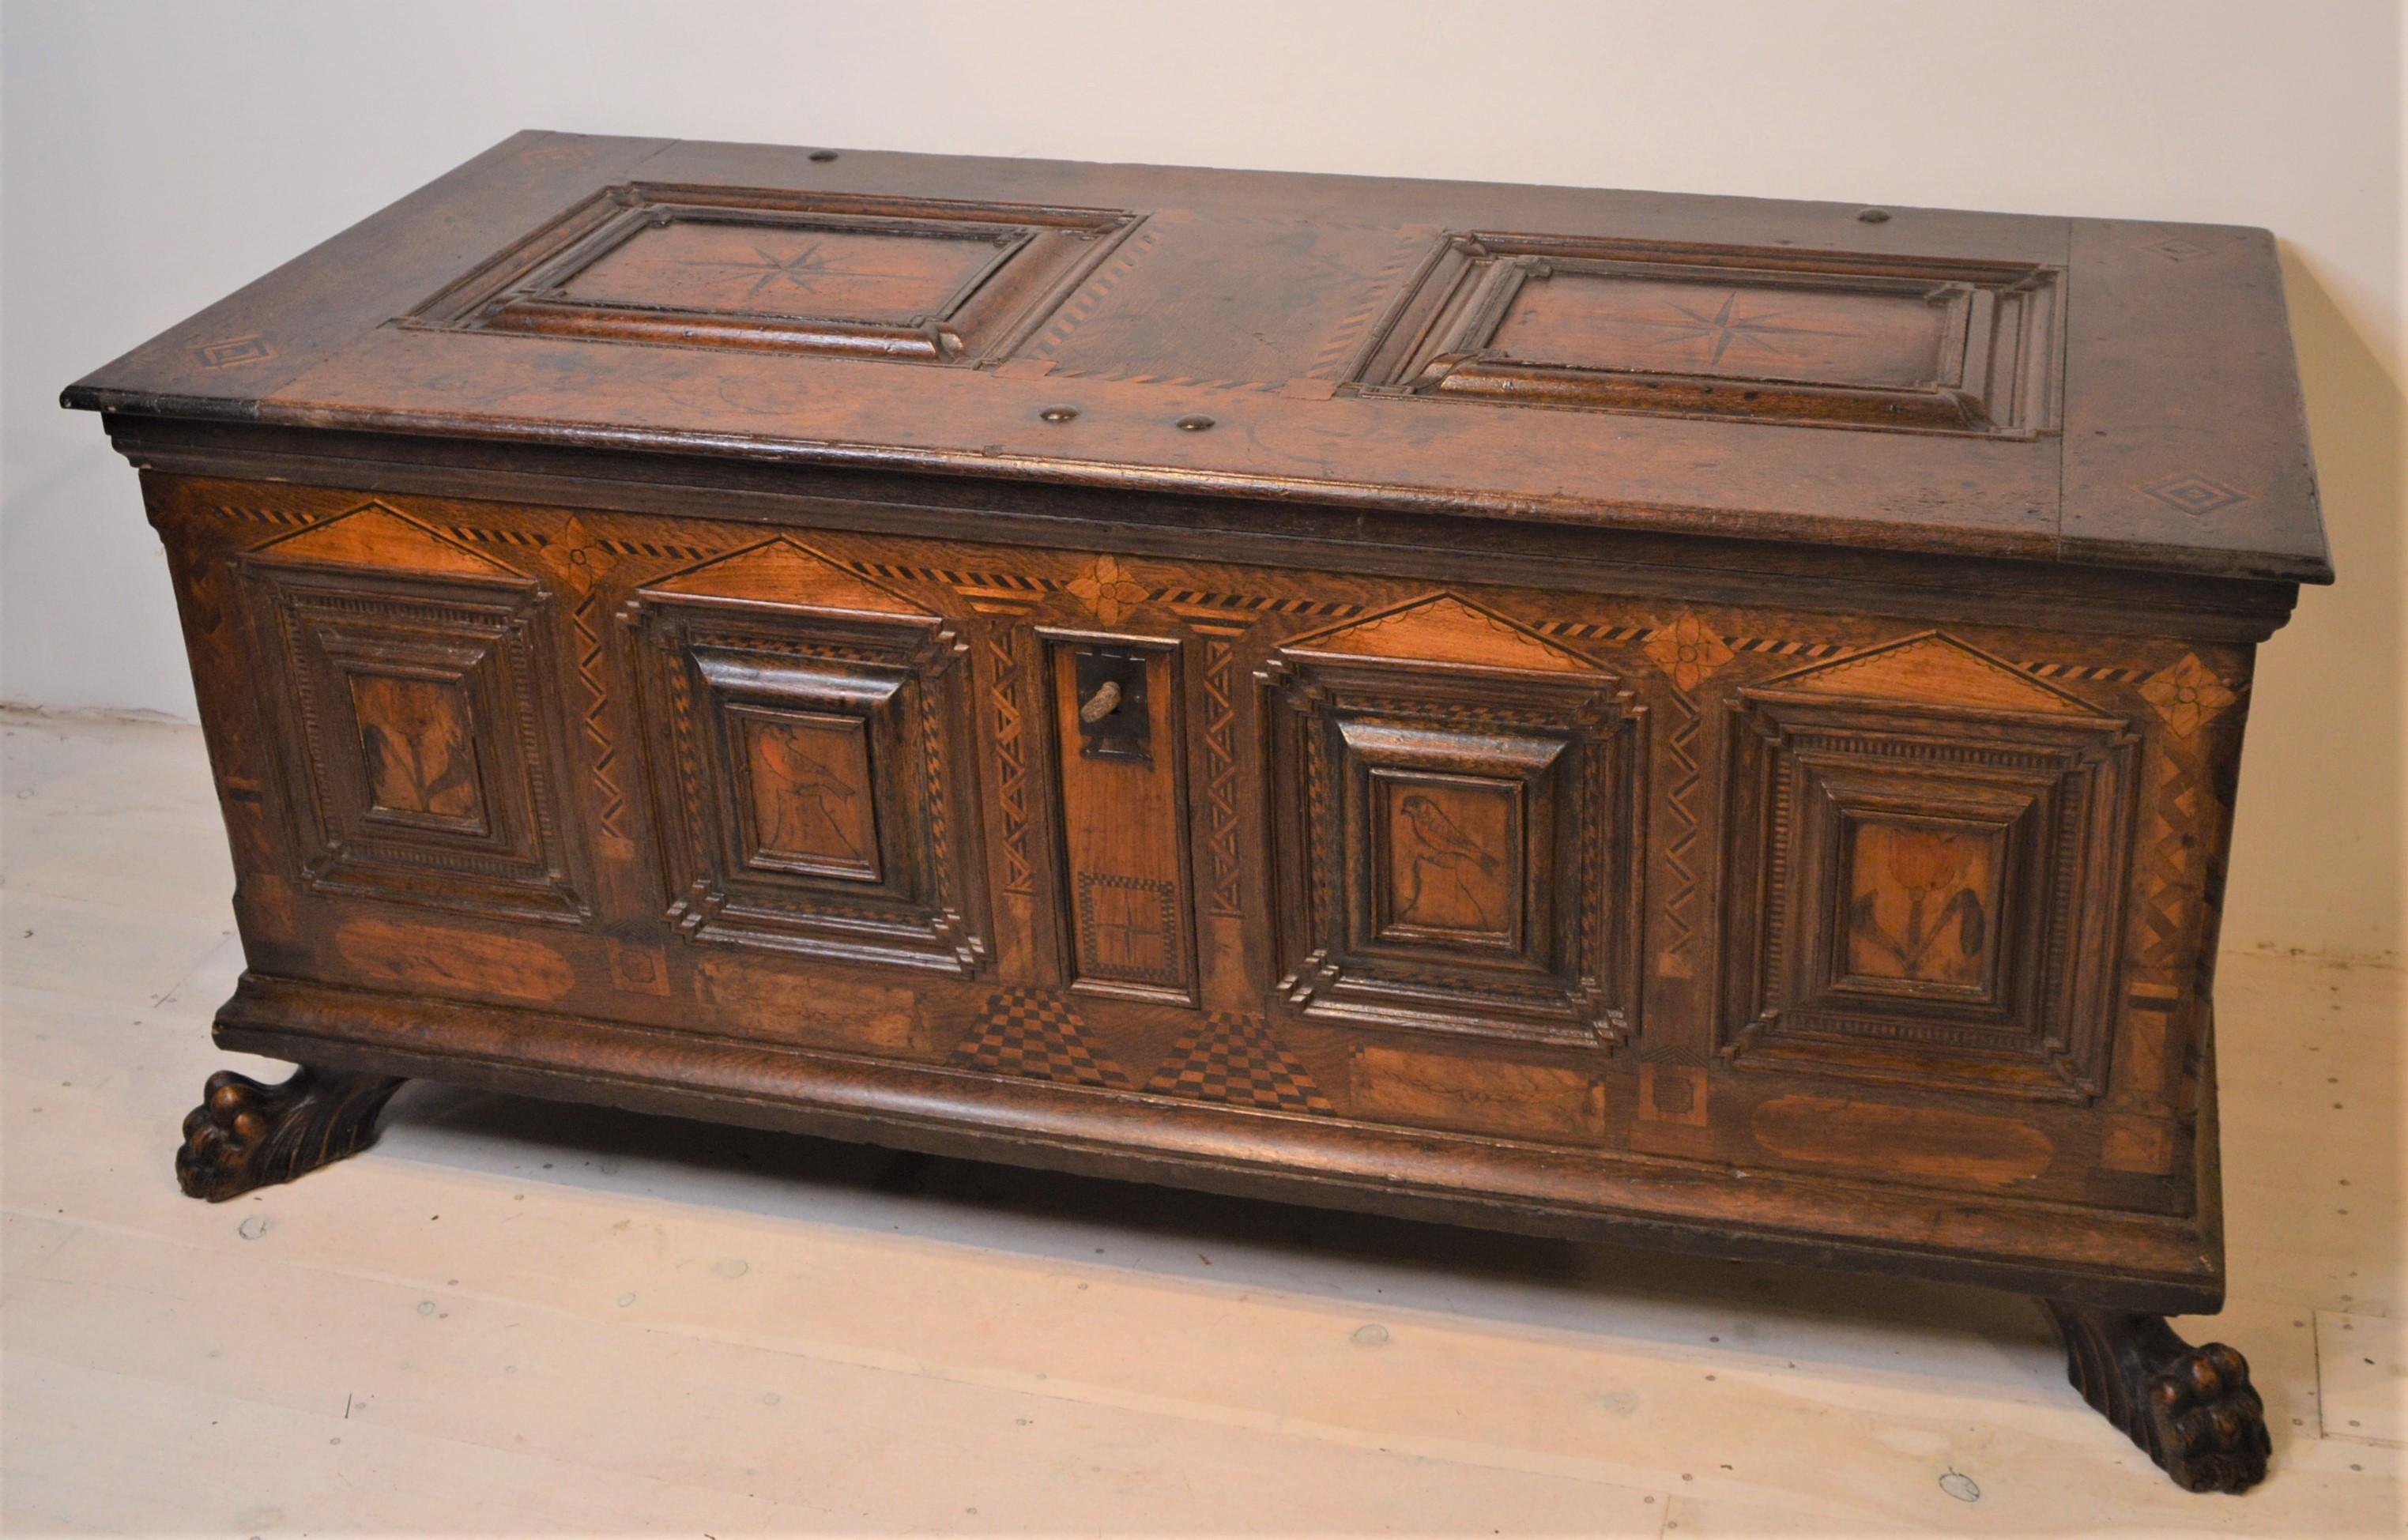 Superb, early 17th century marriage chest in oak , walnut and exotic woods, inlaid with birds and flowers. These exotic veneers include boxwood, bog oak, holly and other indigenous timbers.
Once unlocked, the end panel slides up to reveal two